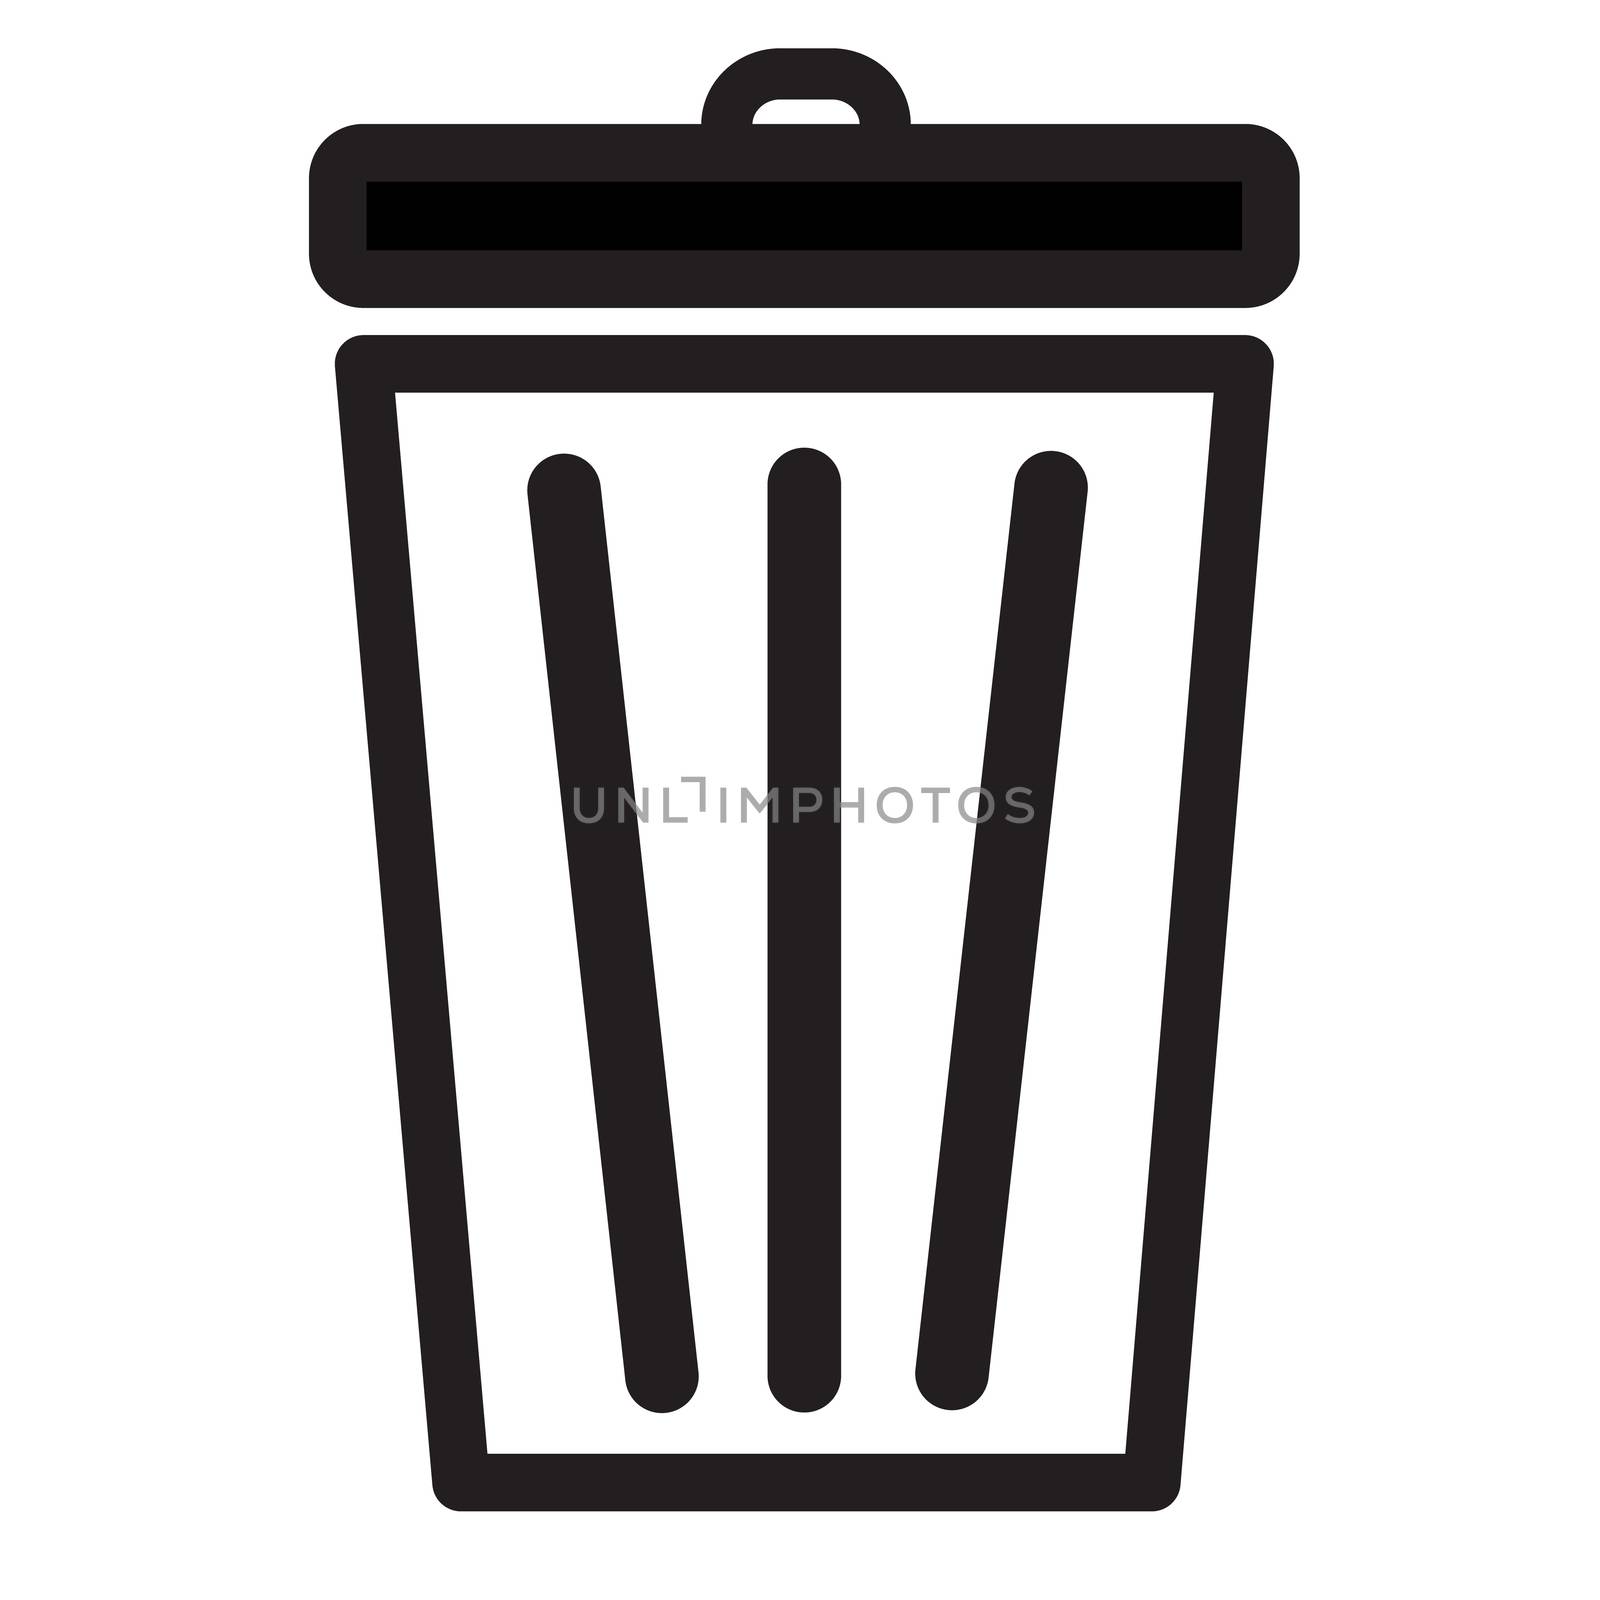 Trash icon on white background. flat style. bin icon for your we by suthee